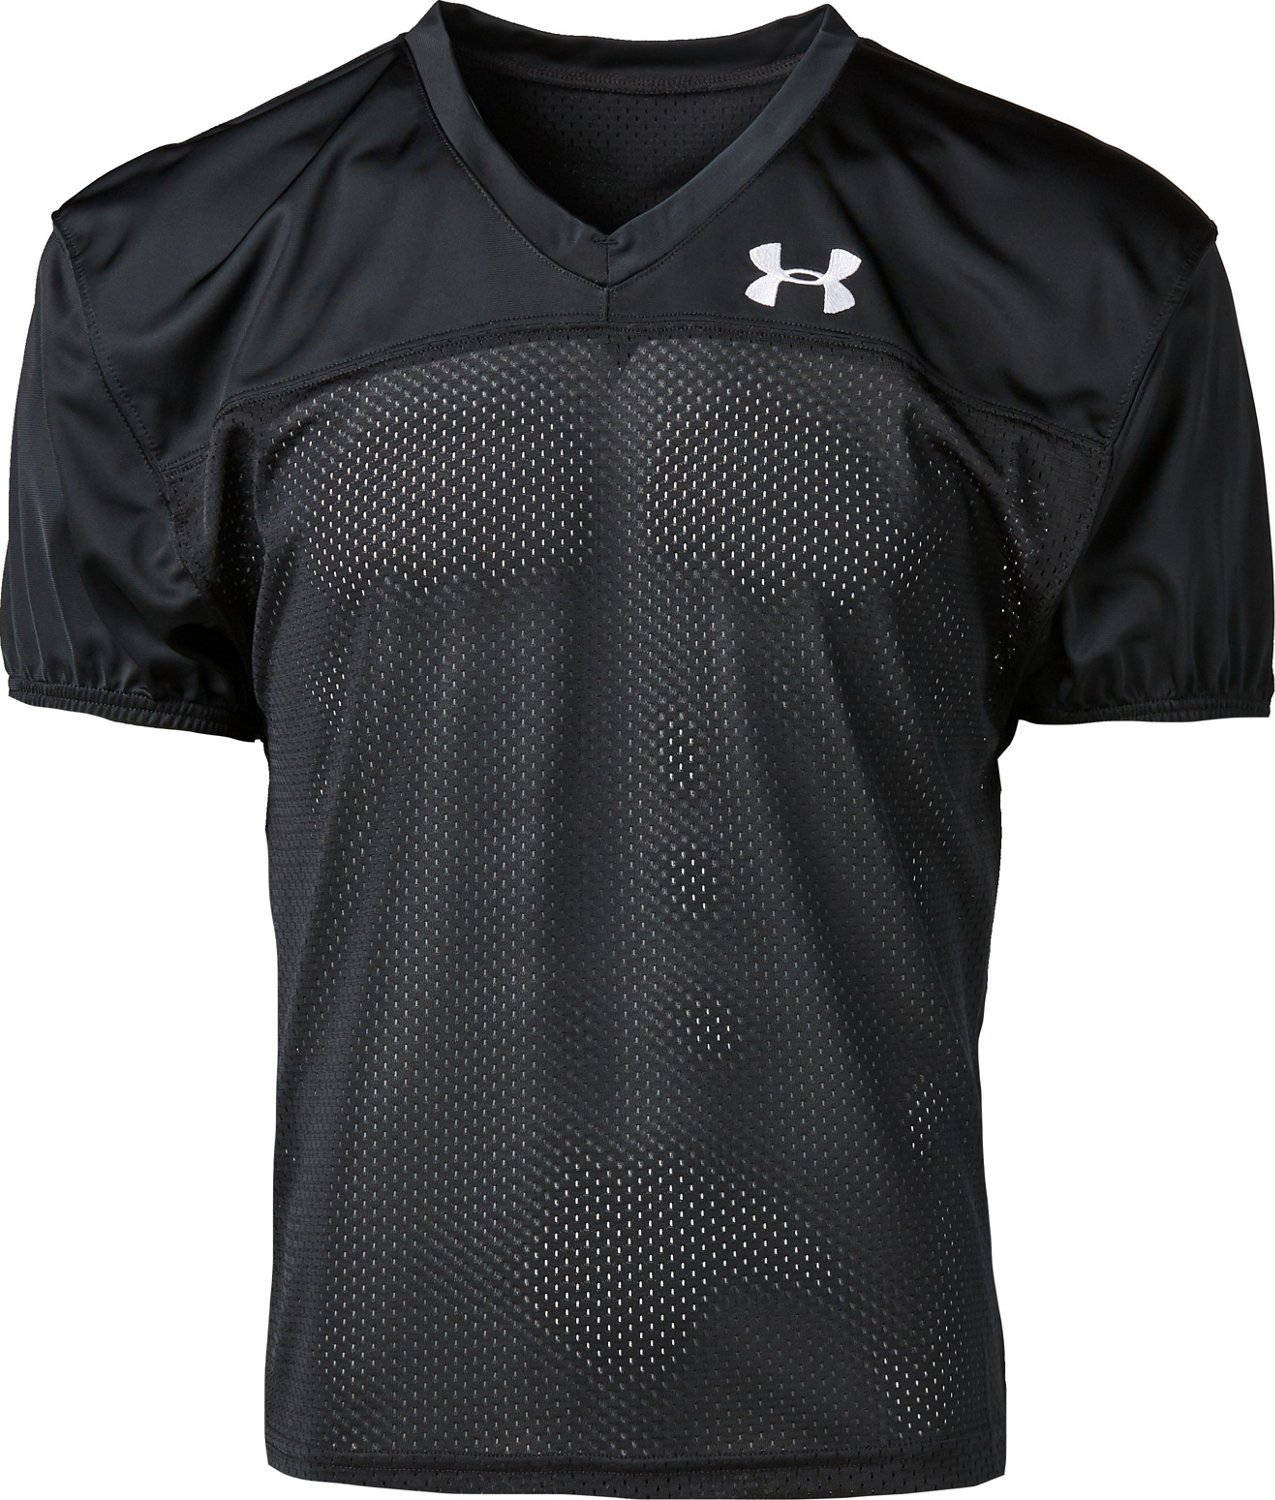 Under Armour Mens Football Practice Jersey